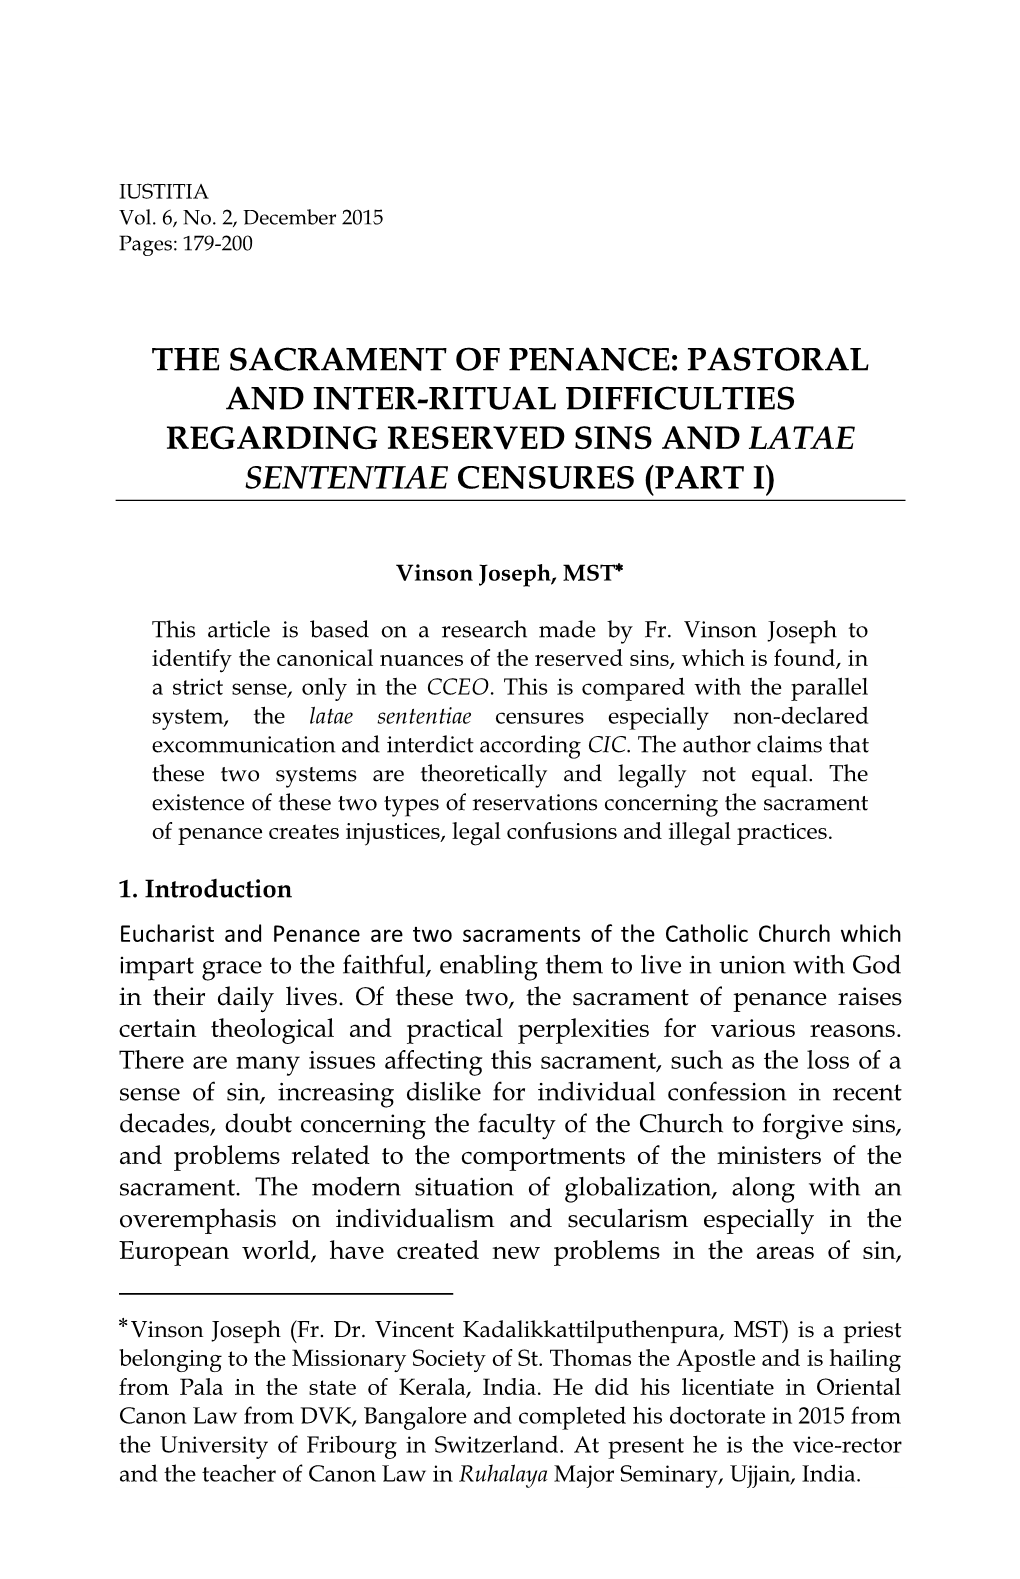 Pastoral and Inter-Ritual Difficulties Regarding Reserved Sins and Latae Sententiae Censures (Part I)